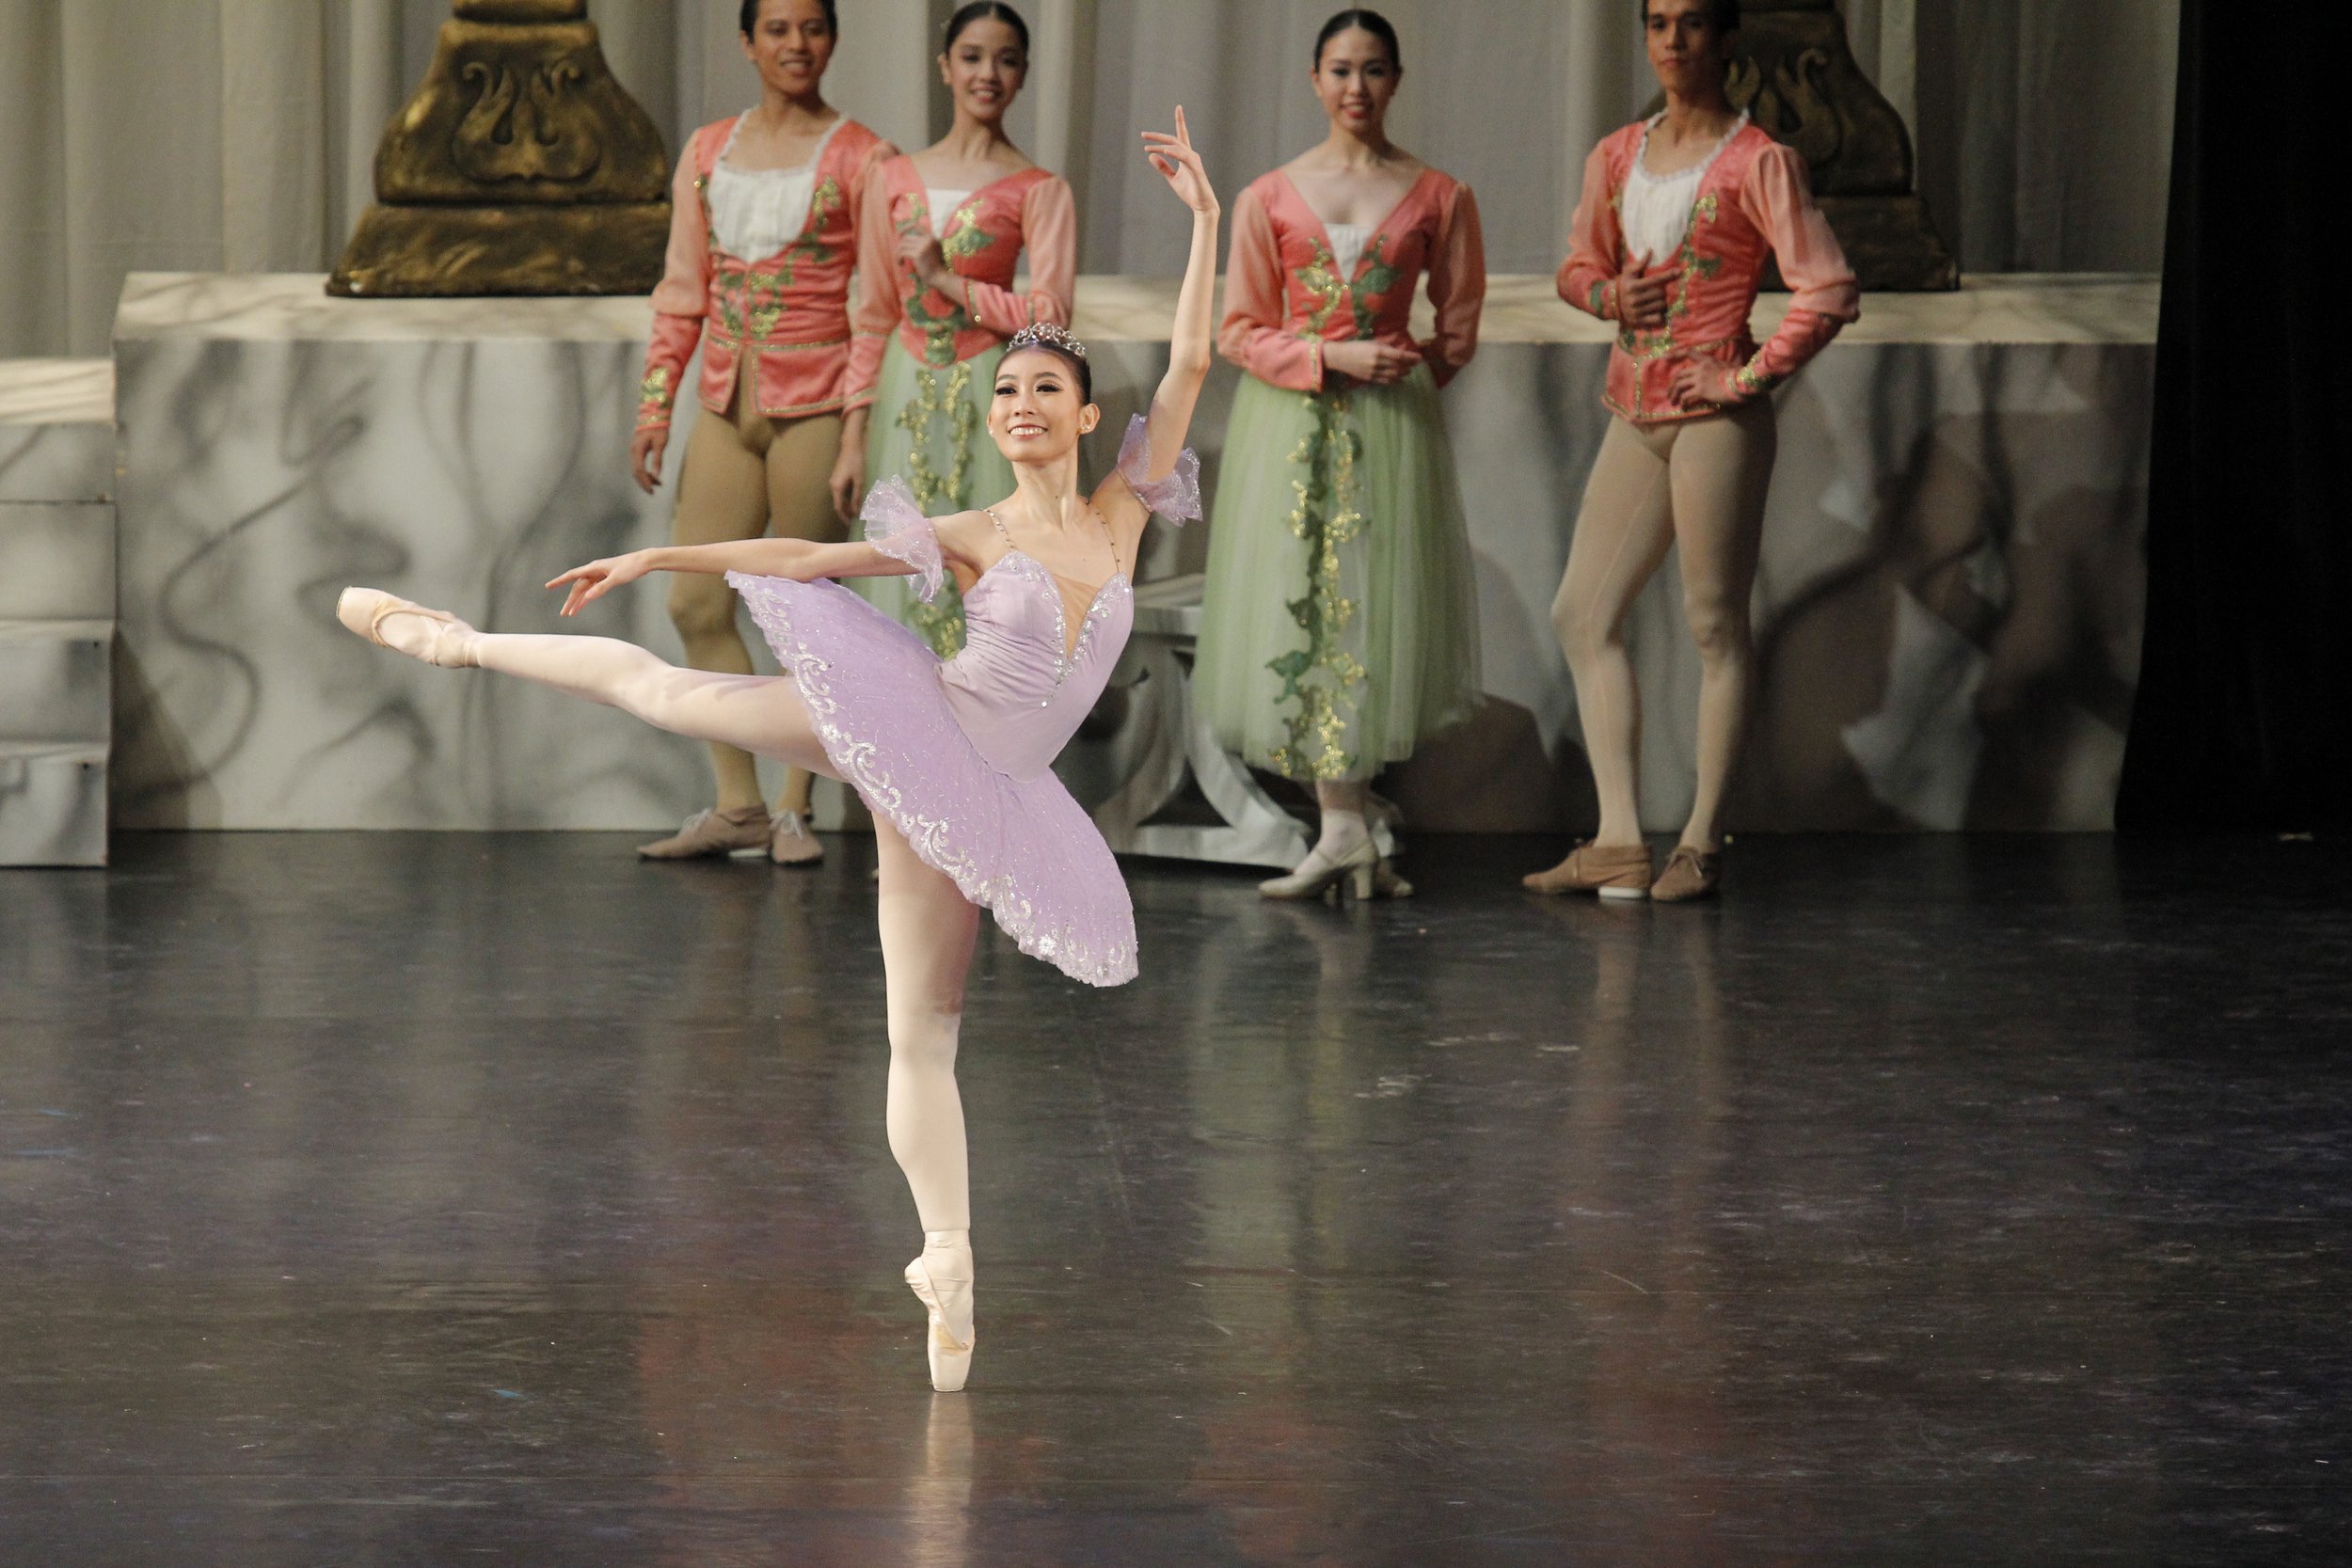    What else is the Lilac Fairy to wear but something in a color that’s dainty and demure befitting her name? The aptly named Violet Hong brings enchantment as she steps into this beloved role from  The Sleeping Beauty,  which is excerpted in Ballet 